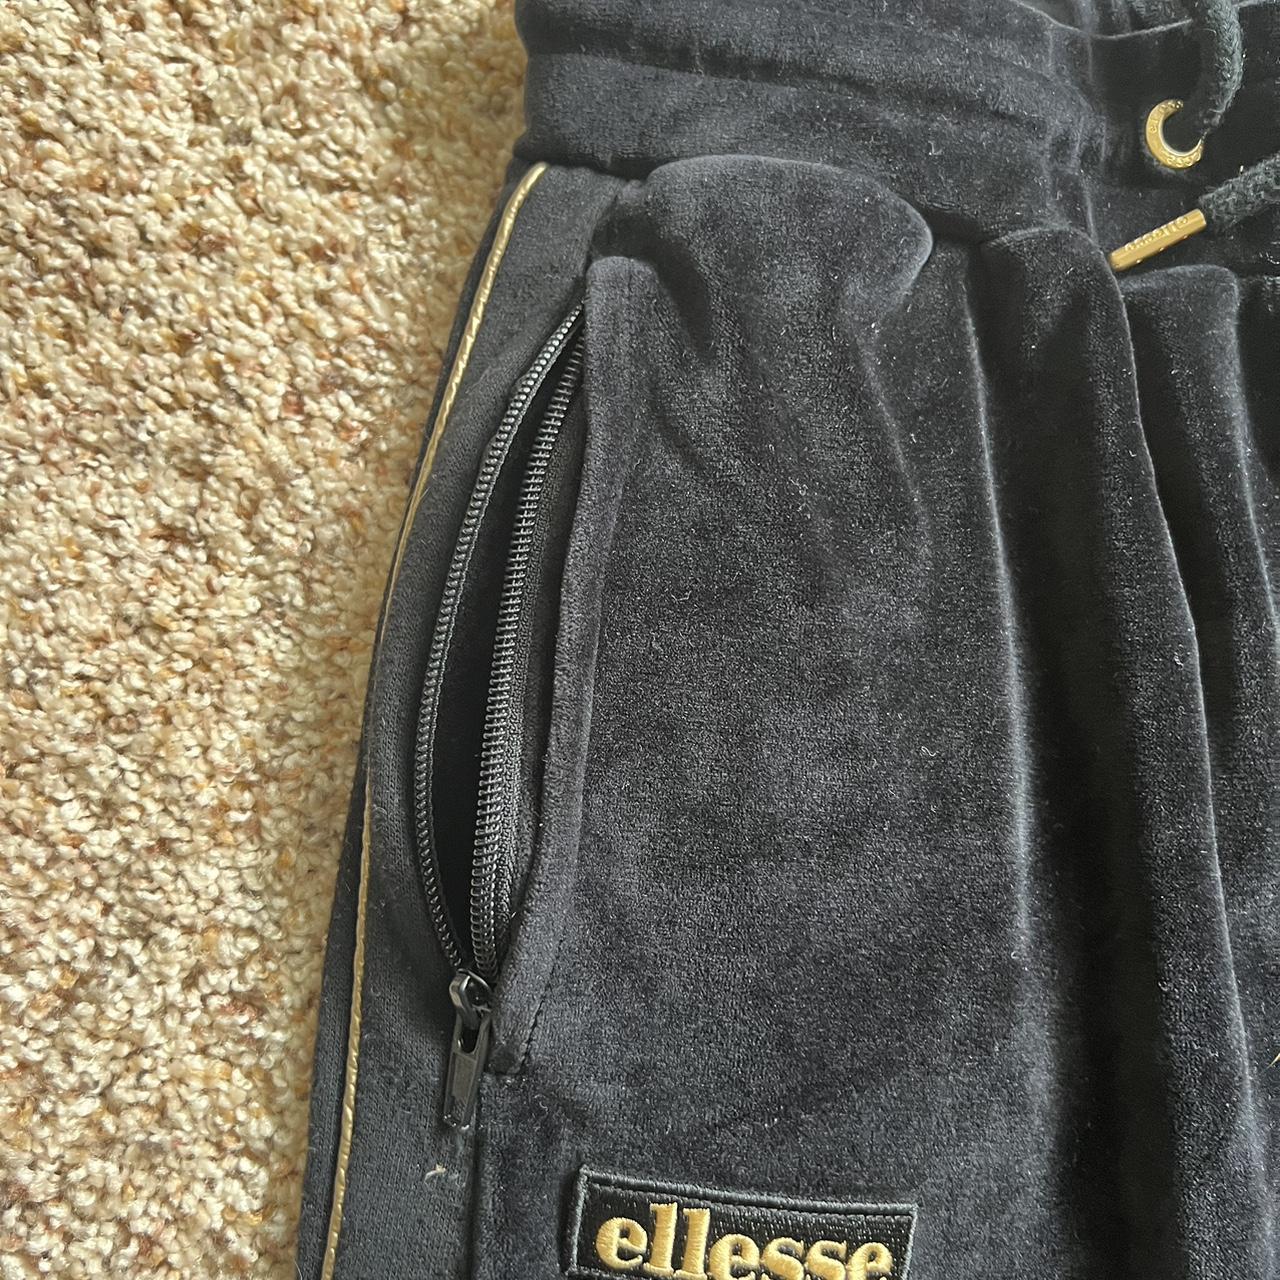 Ellesse Women's Black and Gold Trousers (3)